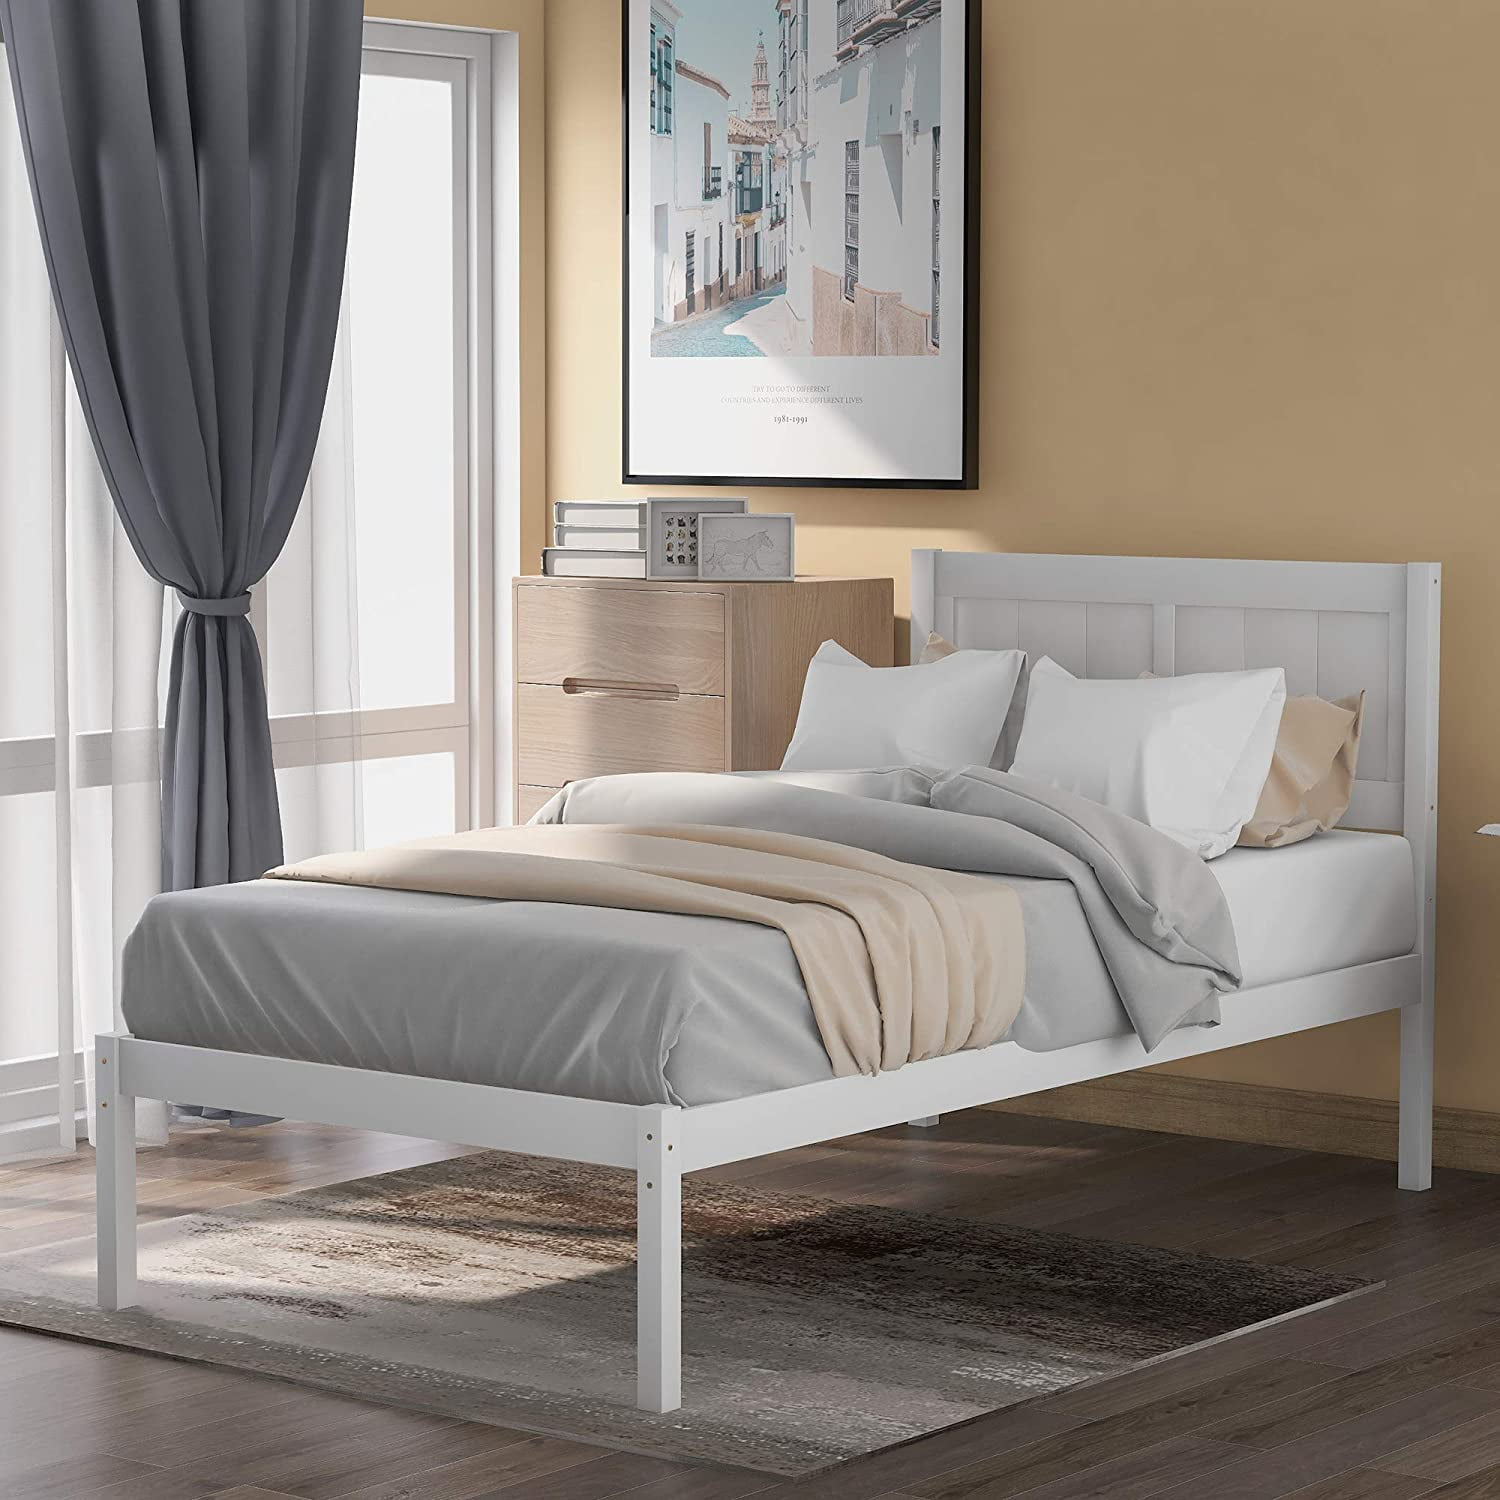 Twin Bed Frames Hard Wood,JULYFOX White Platform Bed Frame with No Box Spring Needed 300 lbs Heavy For Small Spaces Walmart.com